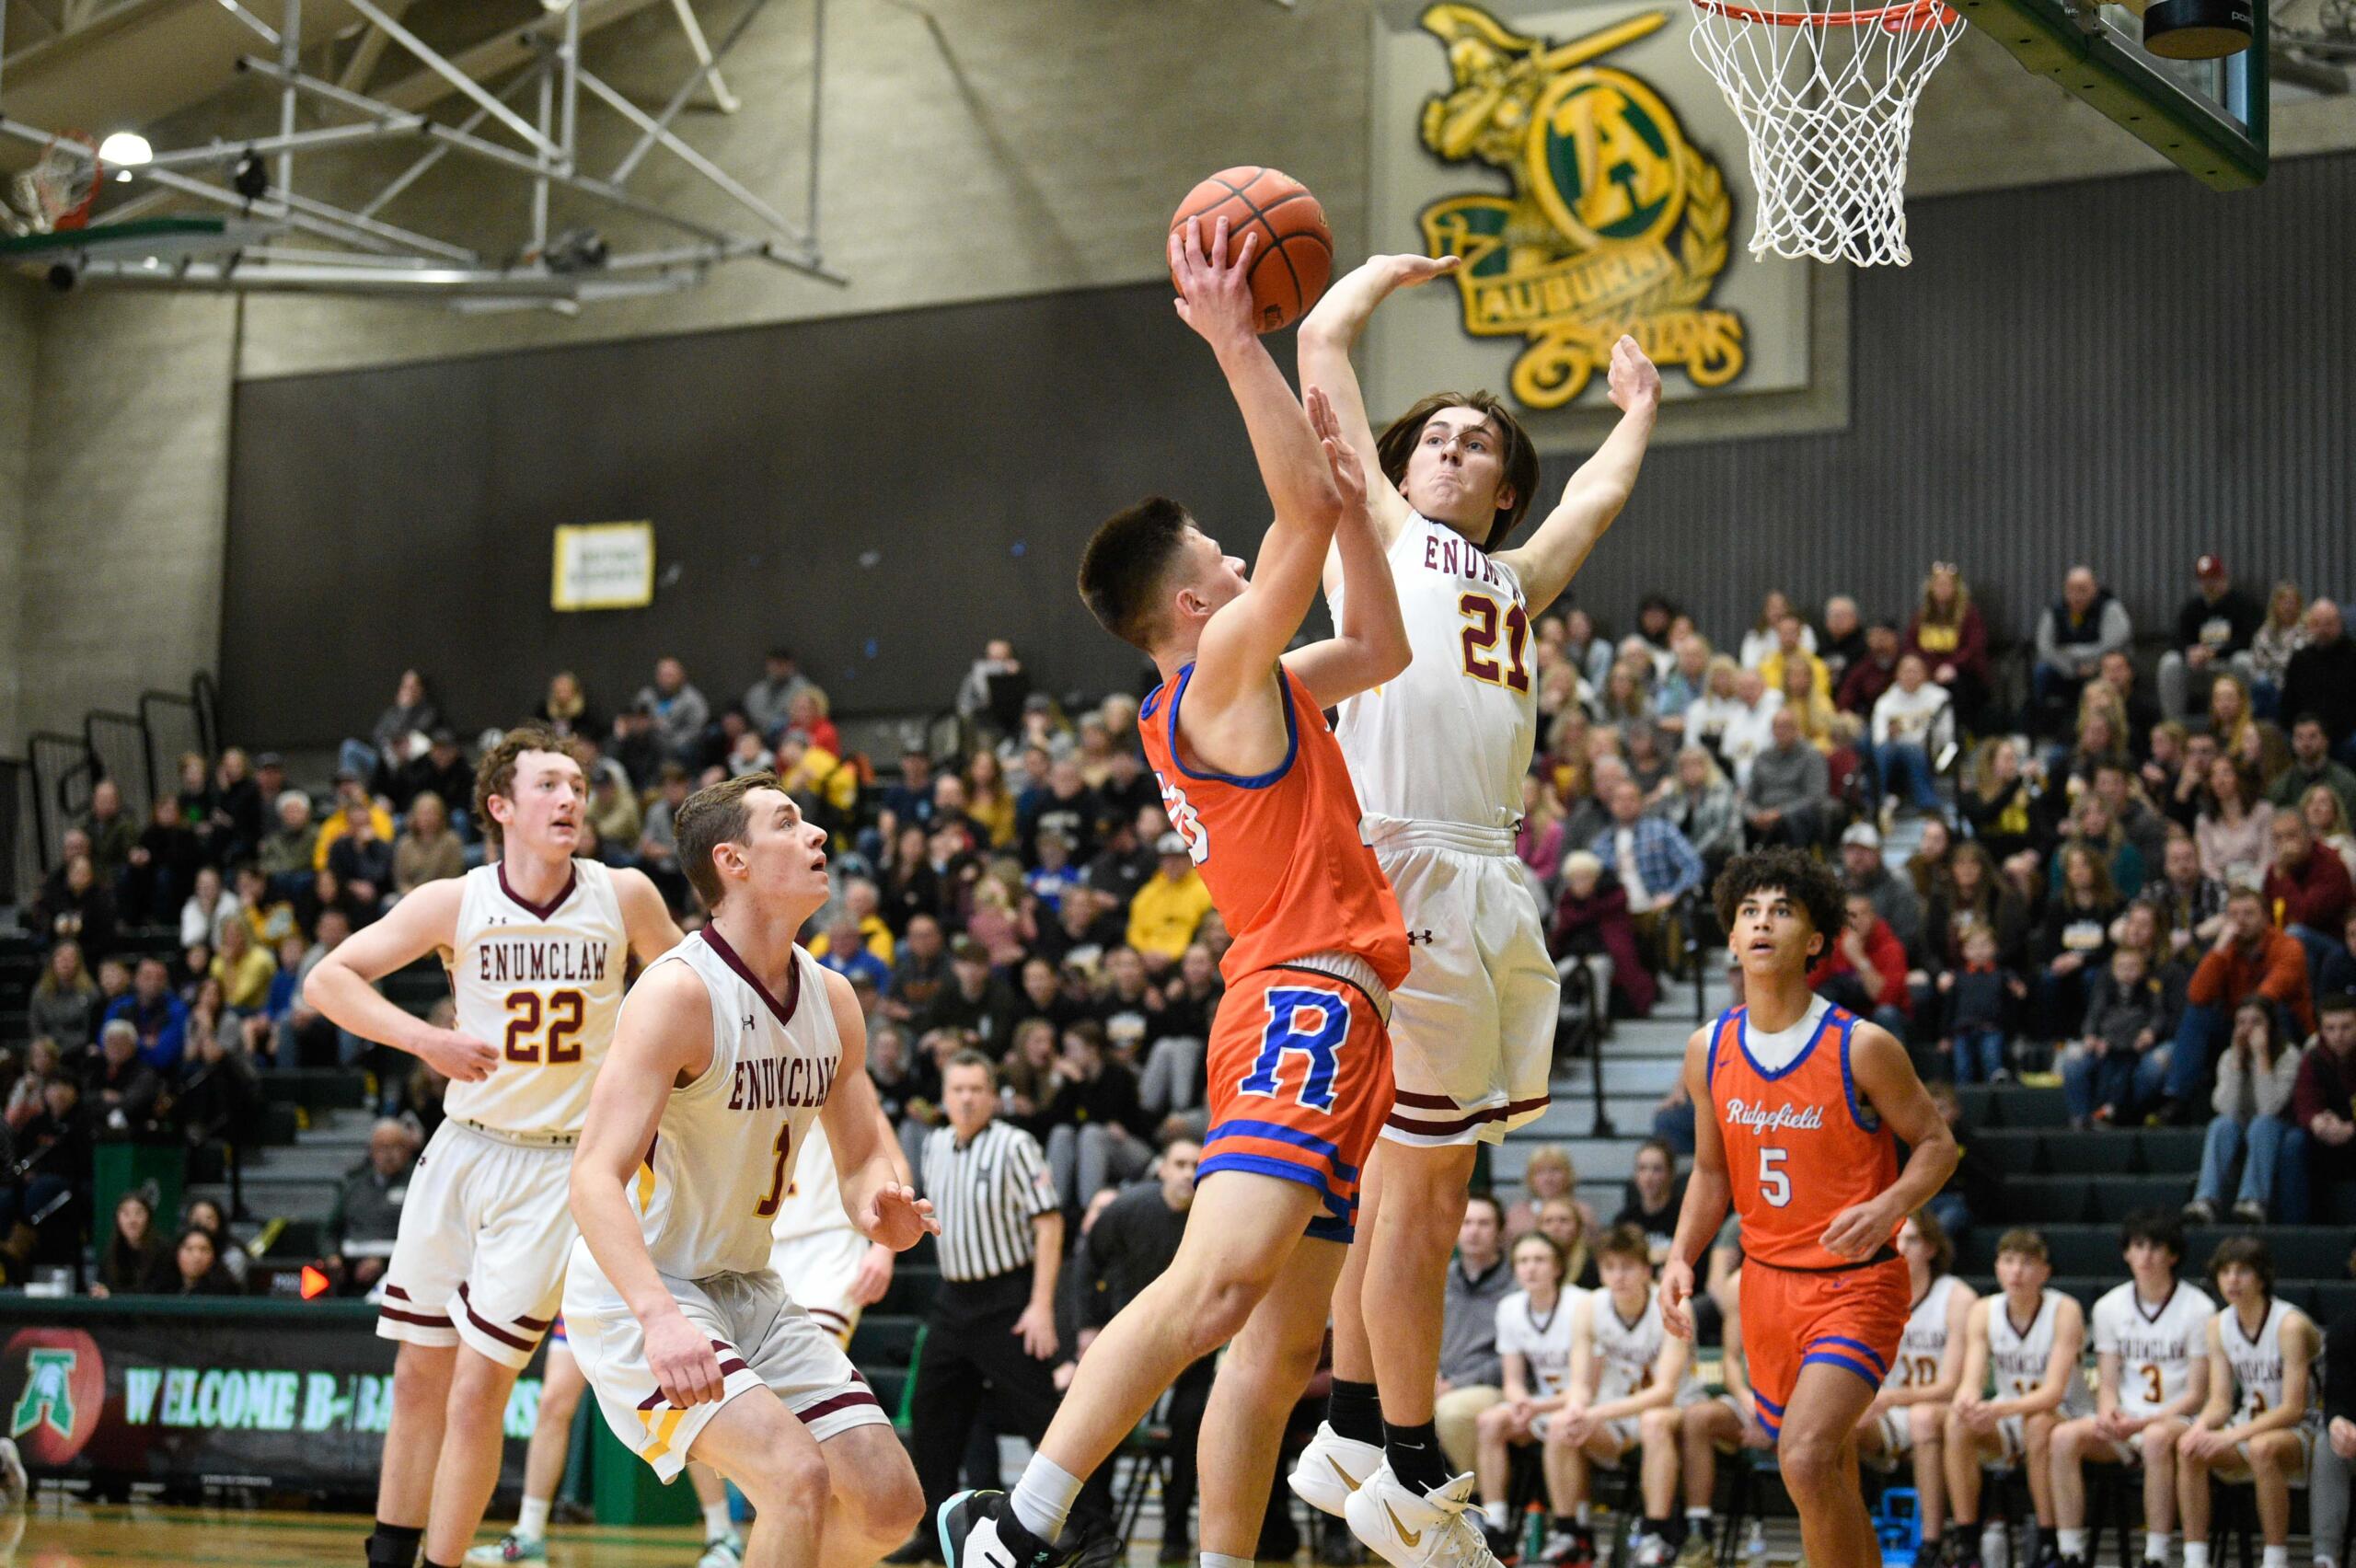 Enumclaw's Karson Holt (21) contests a shot attempt from Ridgefield's Carter Thompson in a Class 2A state opening round game on Saturday, Feb. 25, 2023, at Auburn High School.